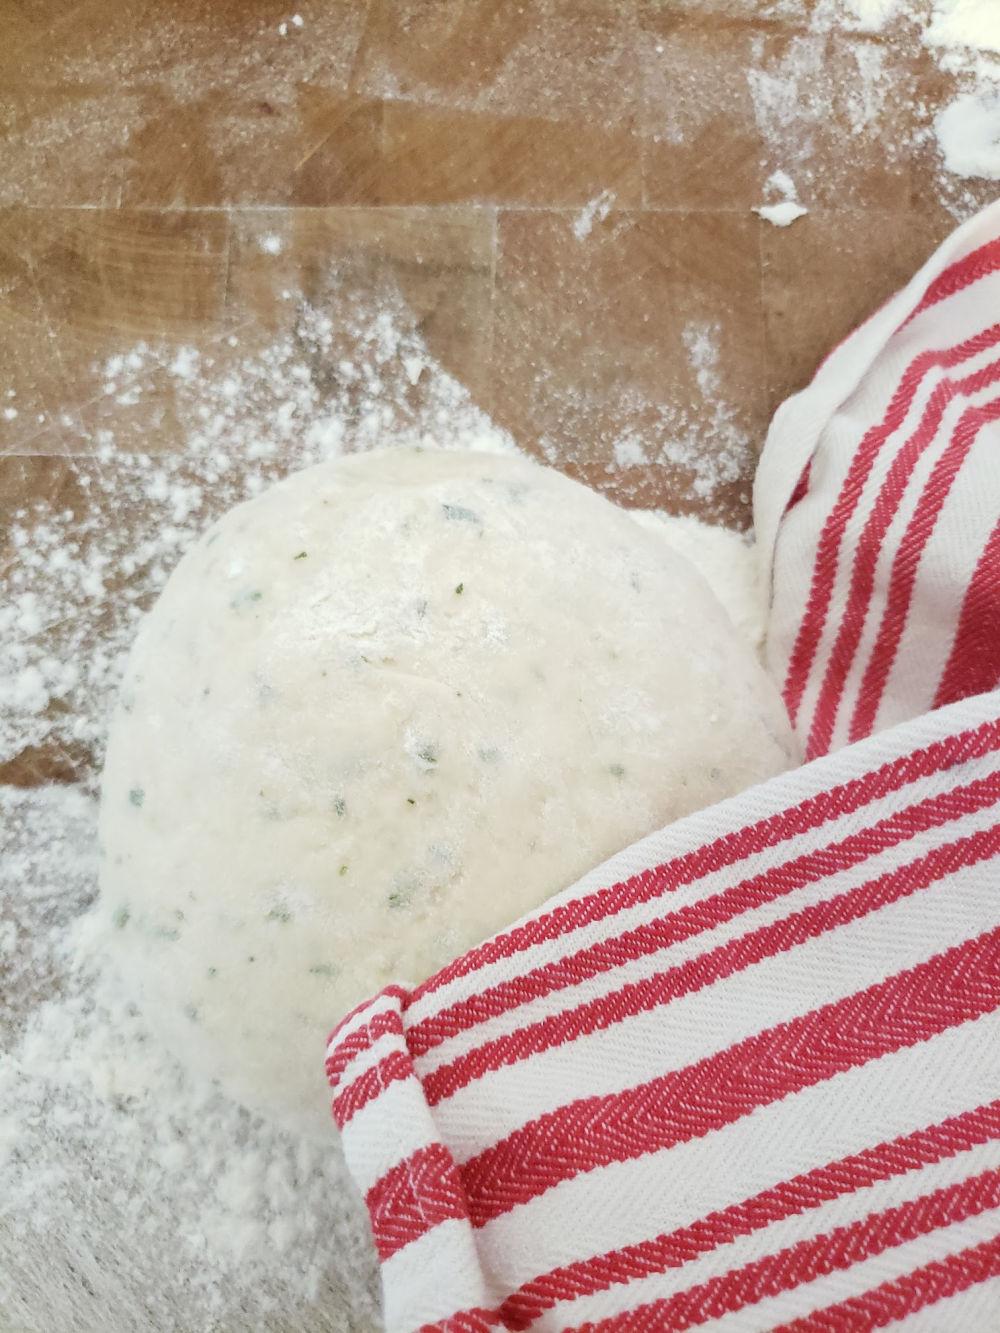 dinner roll dough rising on butcher block under red and white kitchen towel.